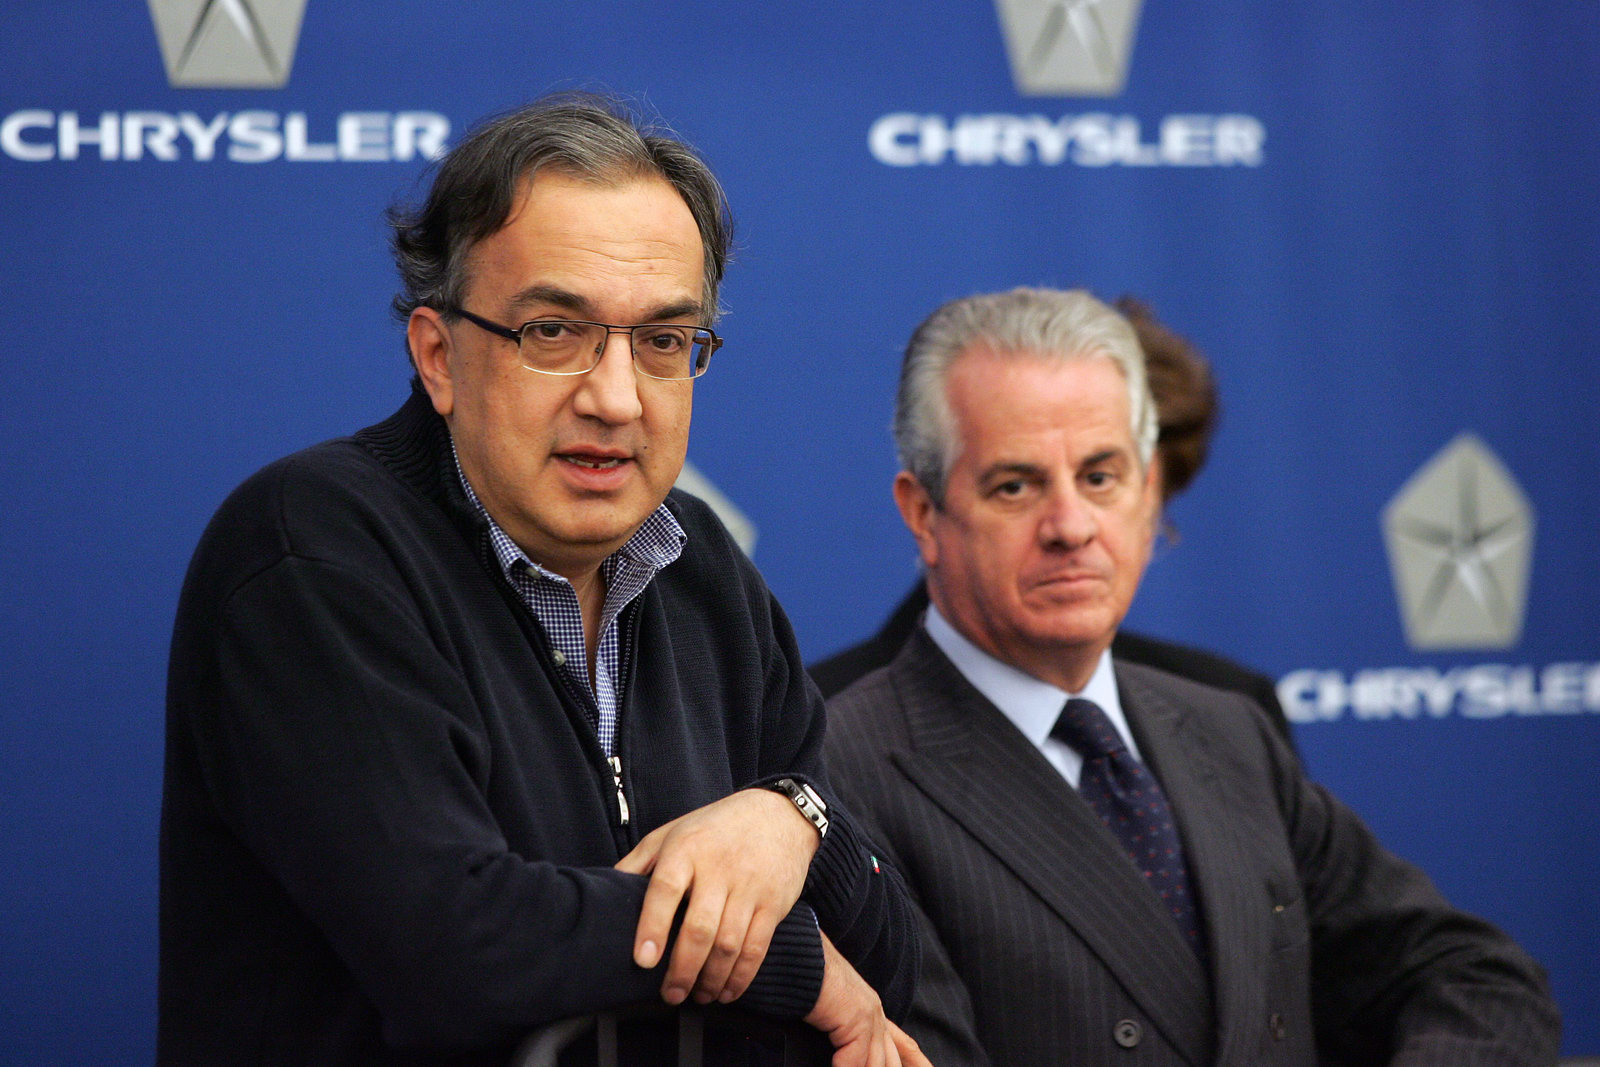 Sergio Marchionne at Chrysler